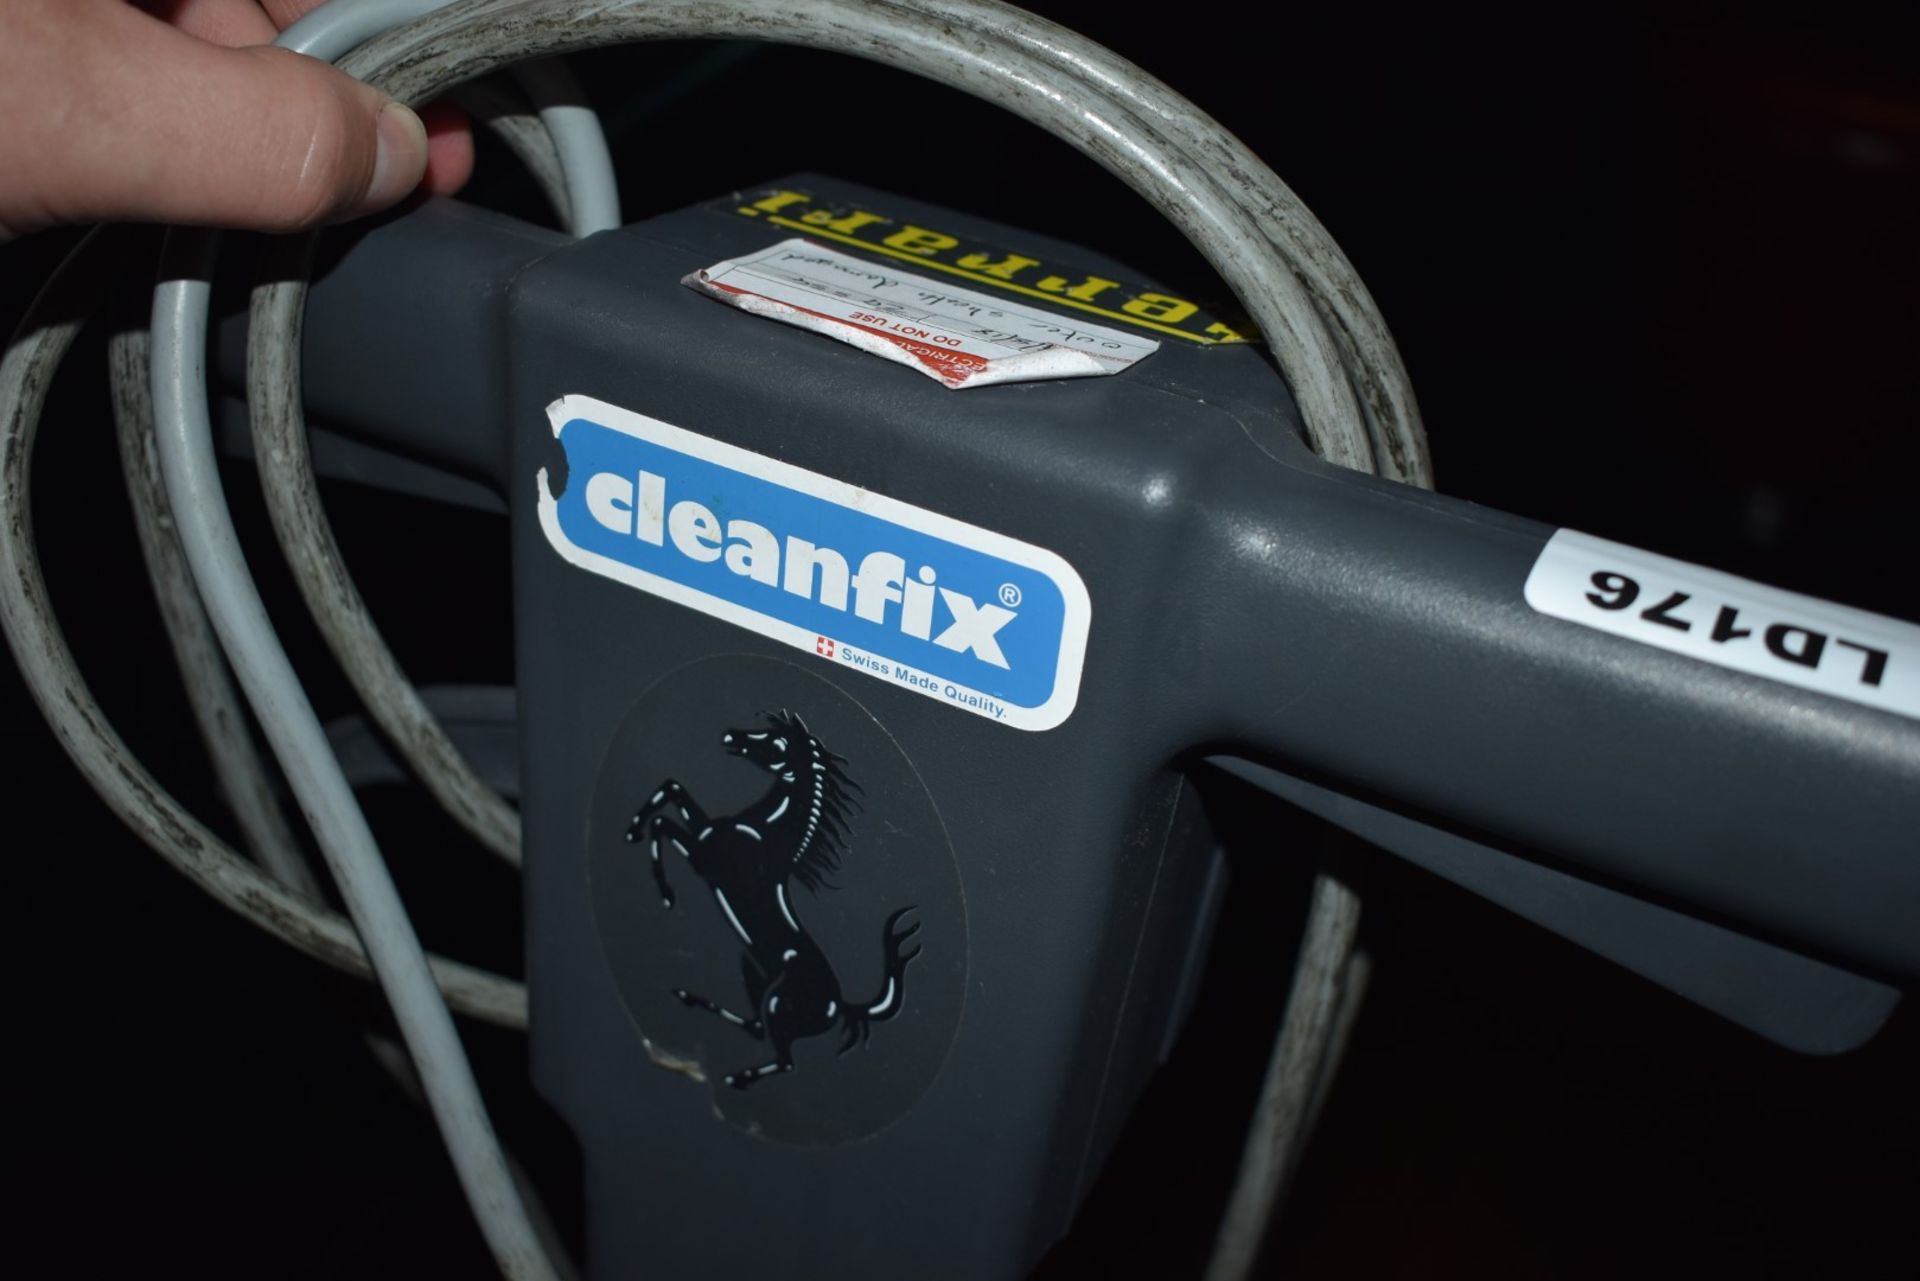 1 x Cleanfix 'POWER DISC 165' Commercial Floor Cleaner - Swiss Made - CL392 - Ref LD176 1F - - Image 2 of 6